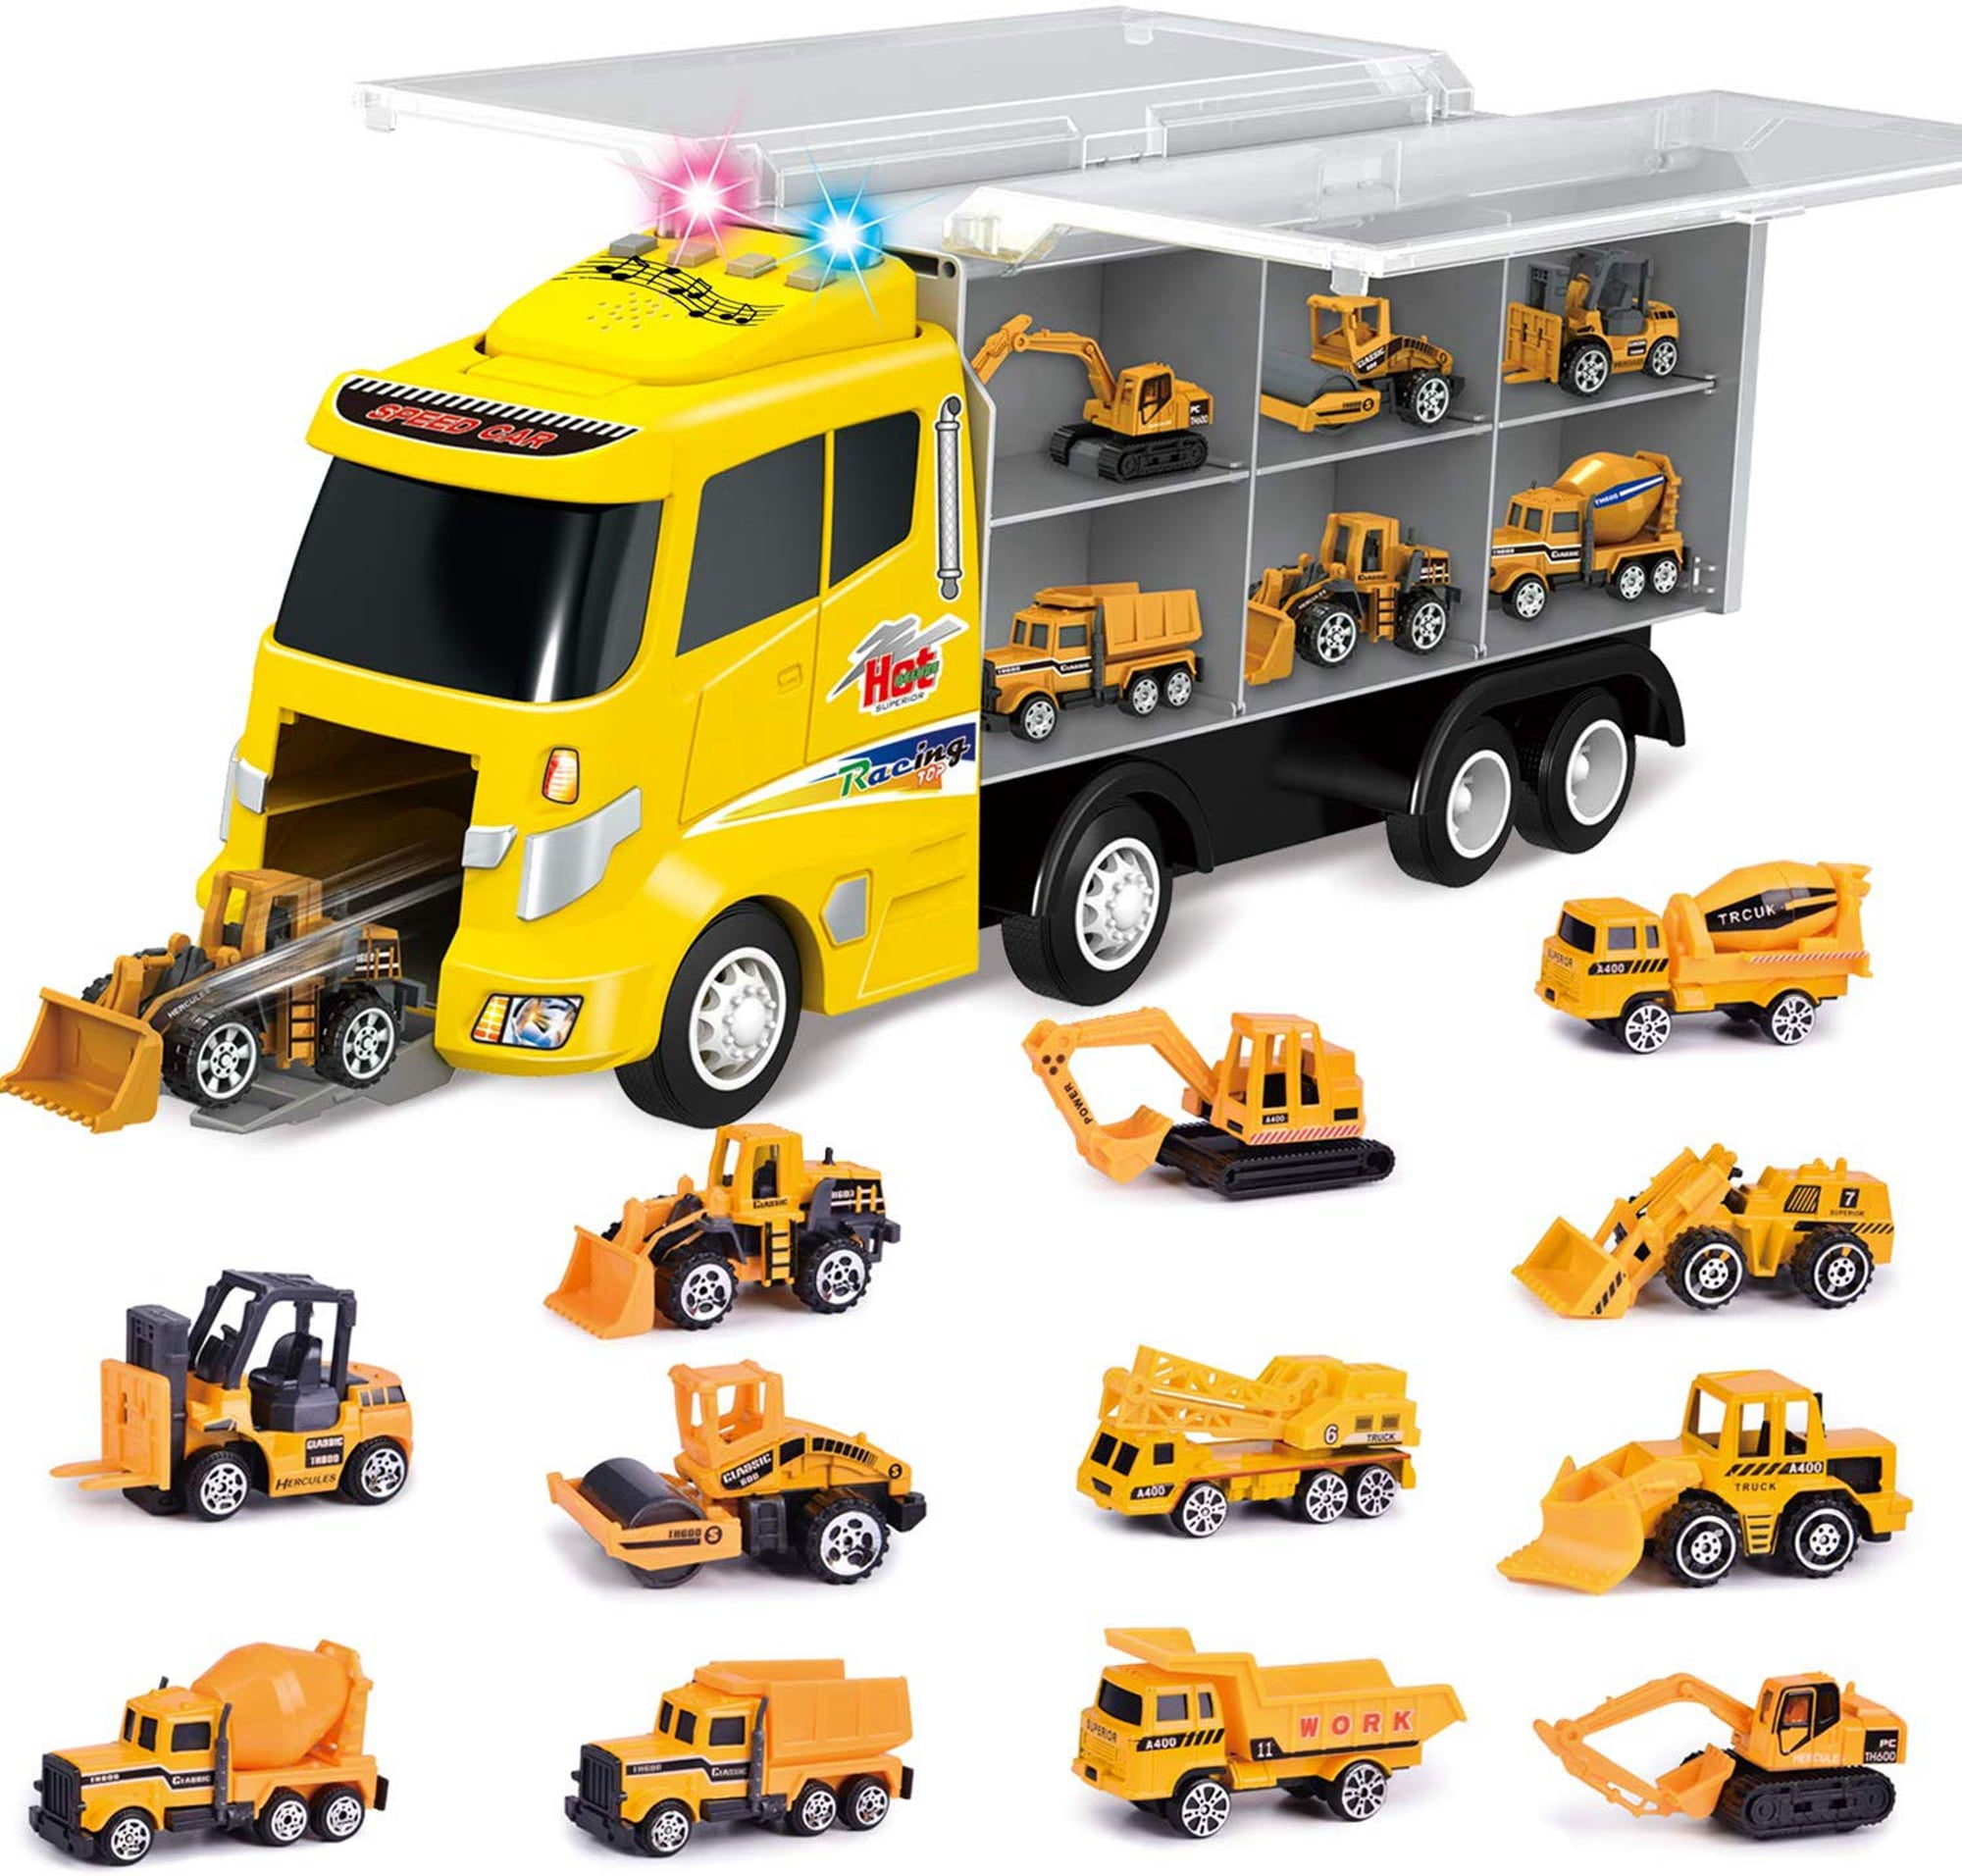 Crane Truck 1PC Toy Crane Truck Diecast Metal Cars Construction Truck wiht Light and Sound Pull Back Vehicles Toy Trucks for Boys Age3,4,5,6 